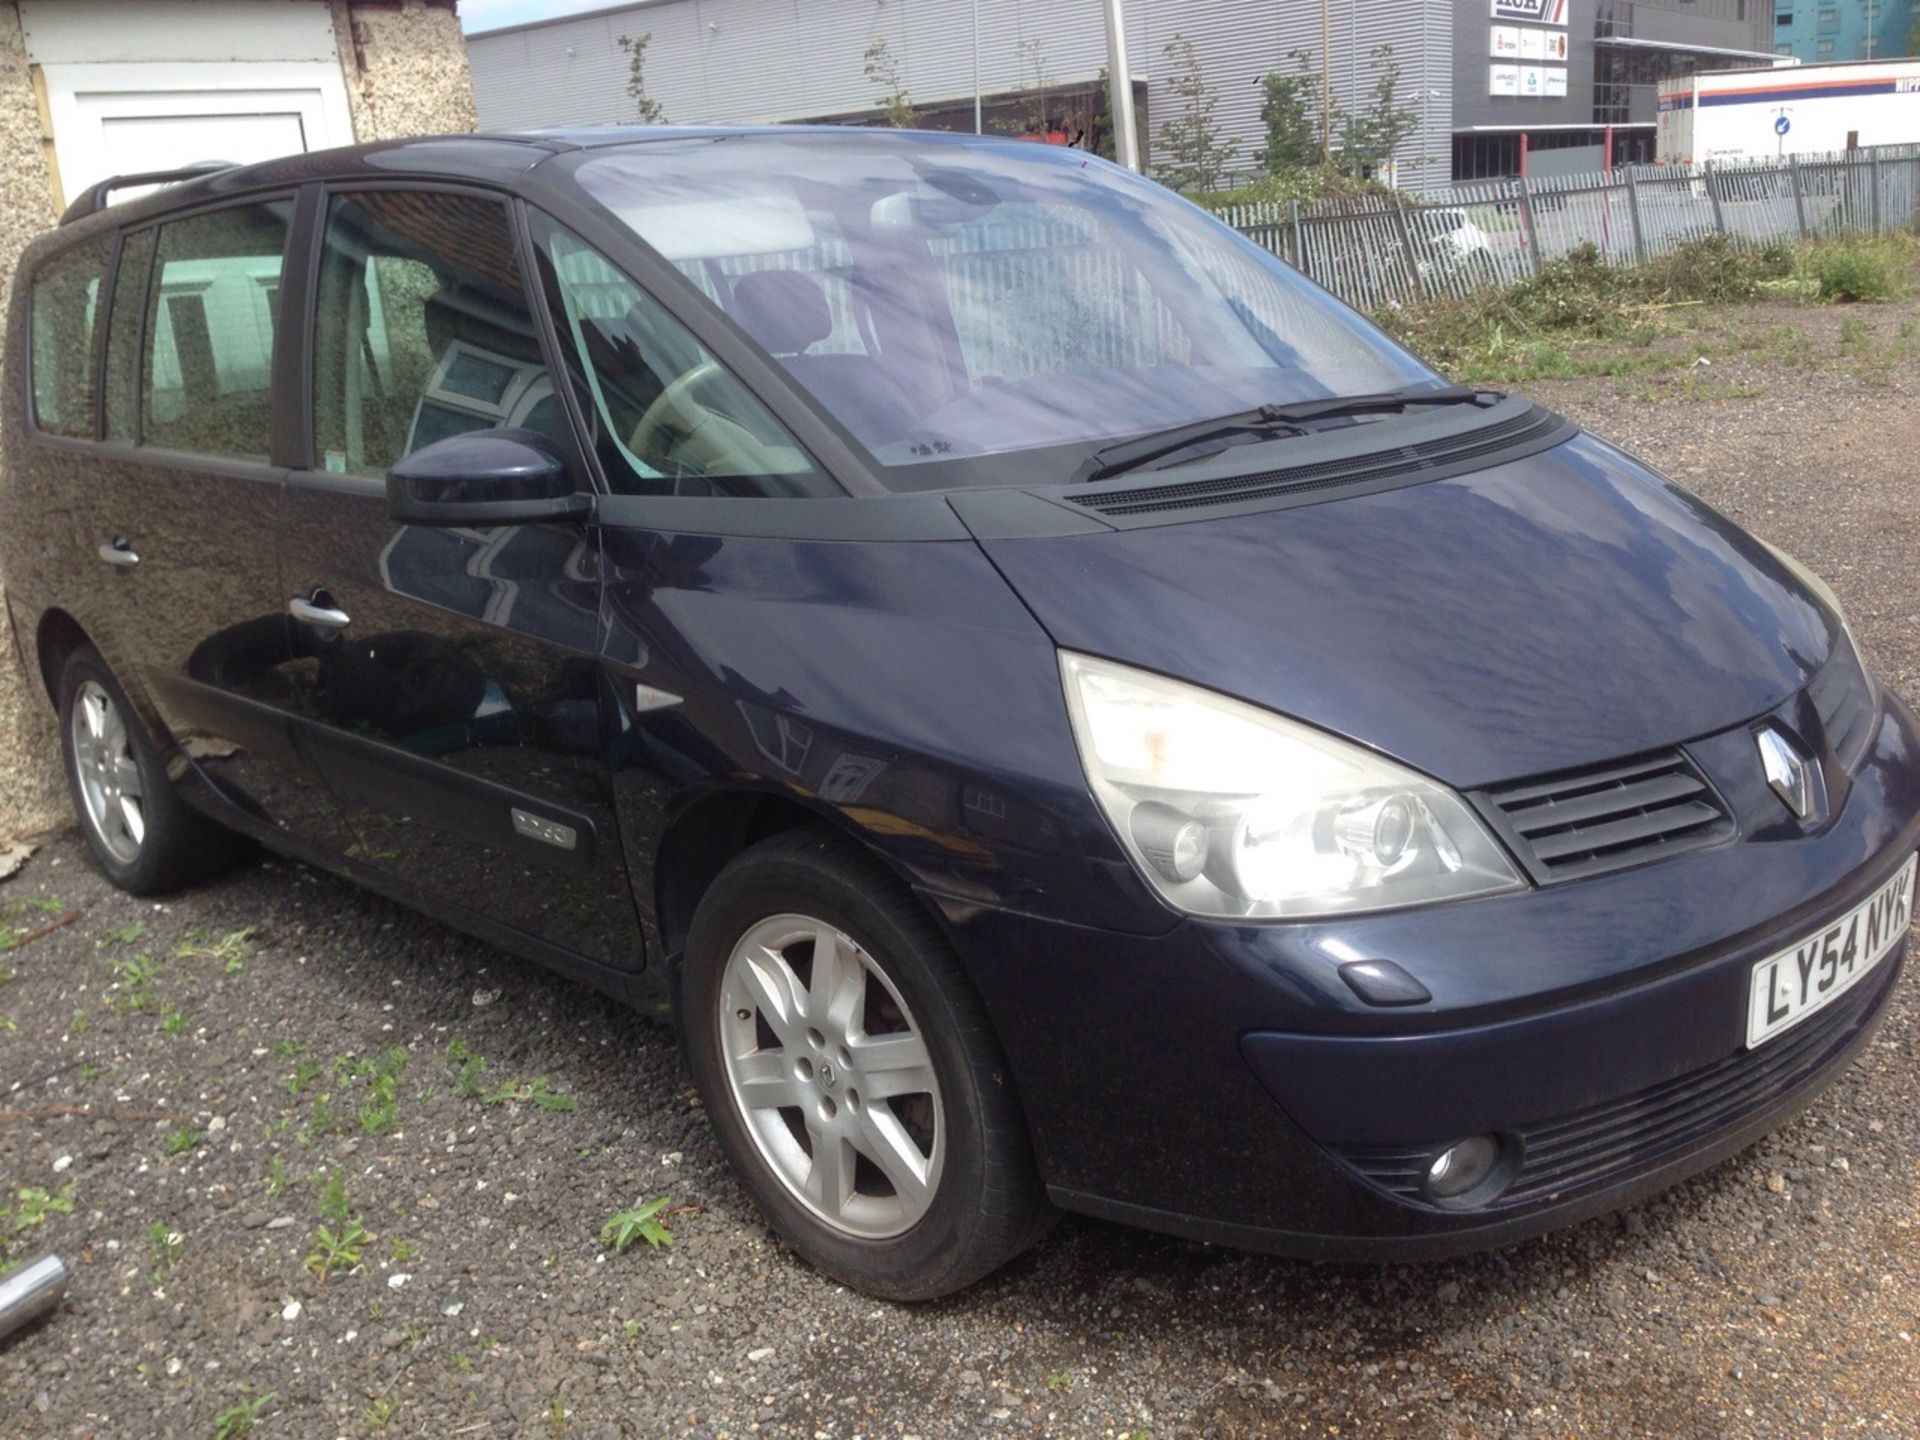 2005/54 Renault grand espace initiale dci a 2.2 diesel MPV - Image 2 of 7